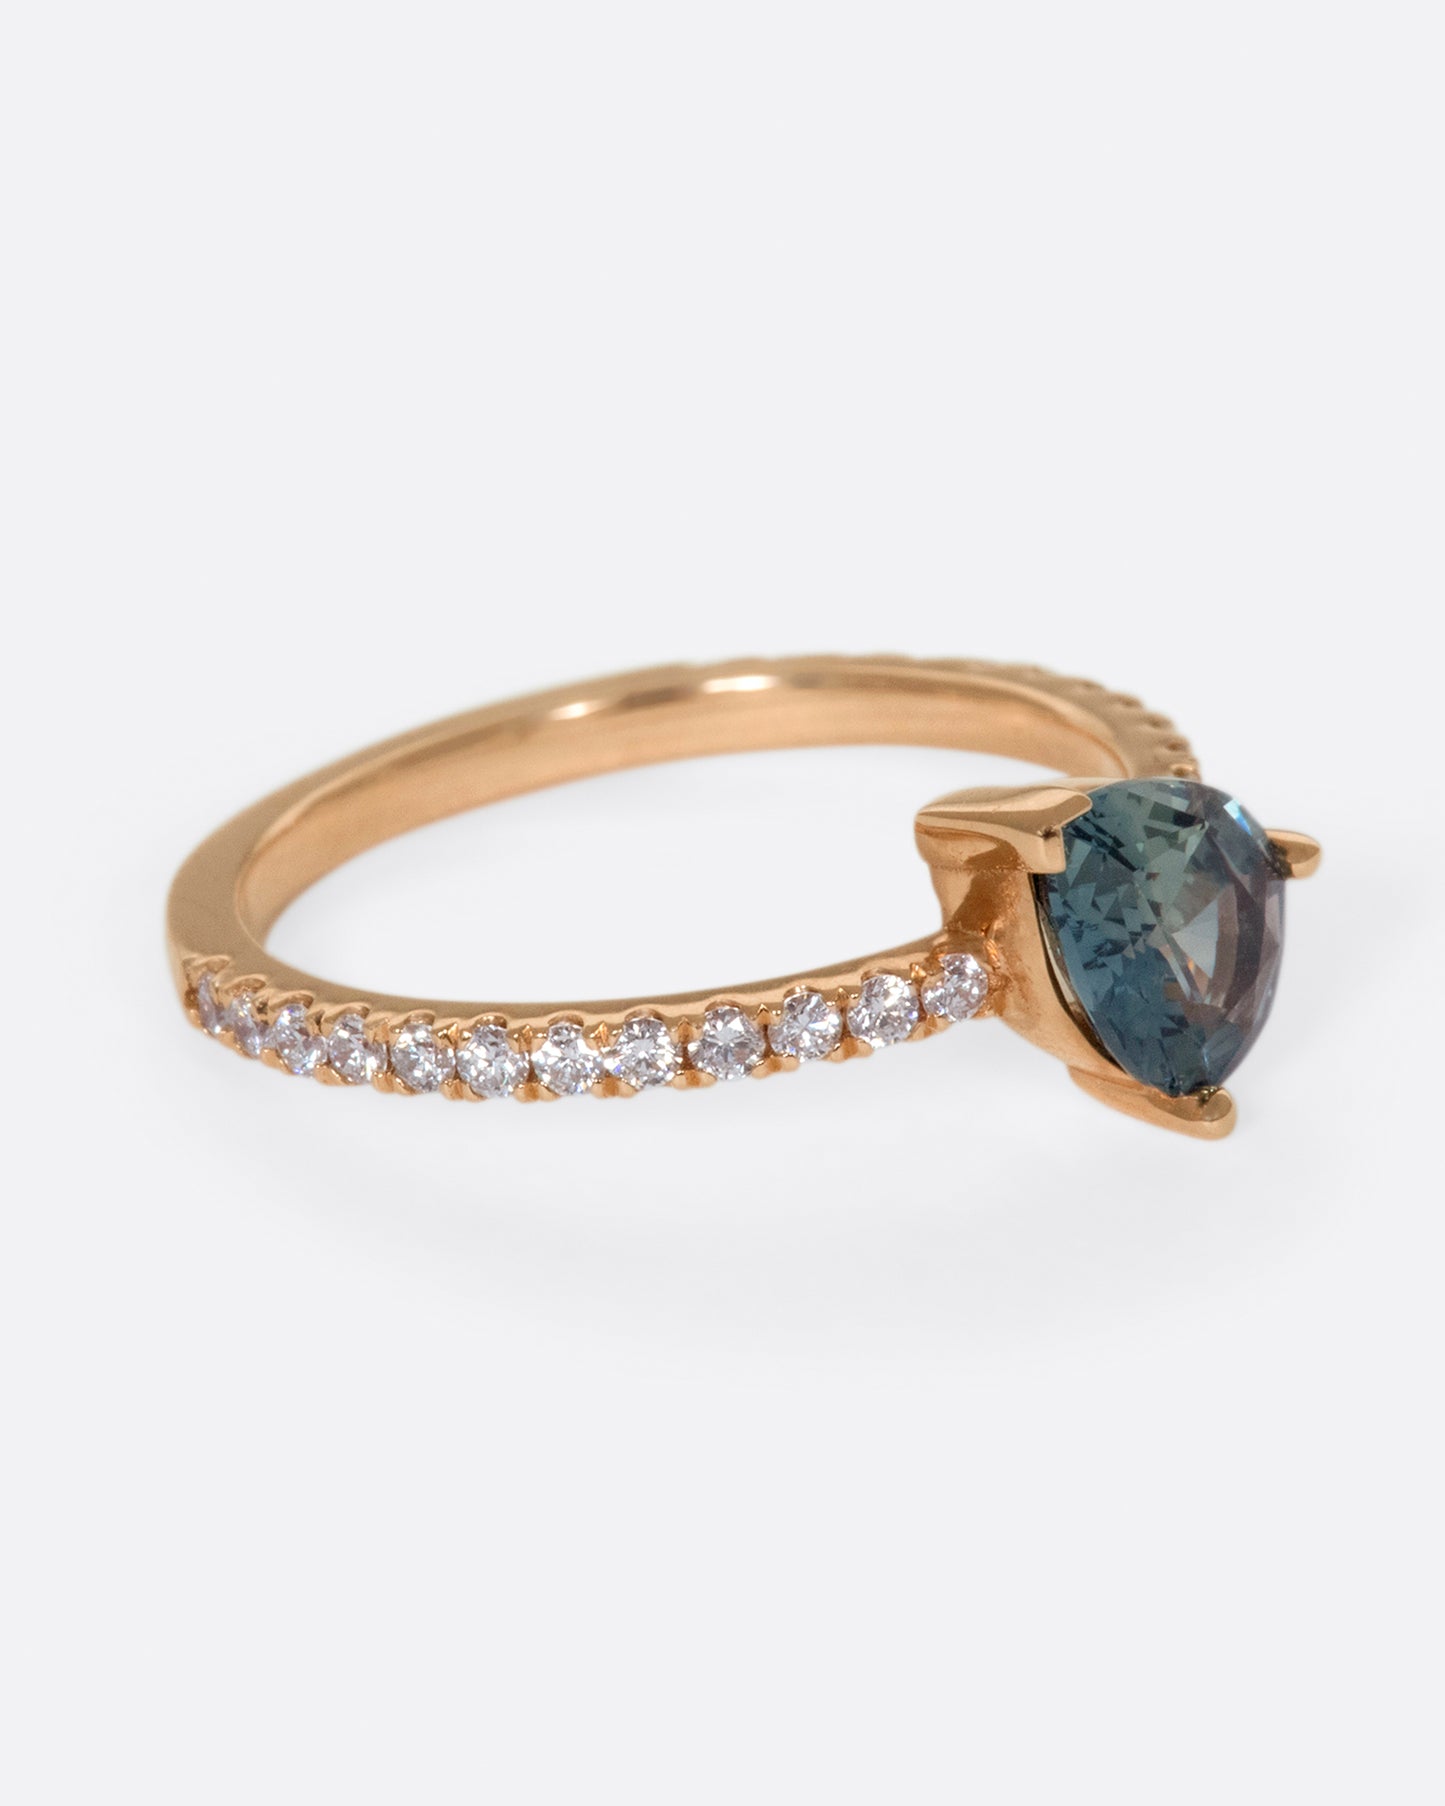 The saturated blue-green sapphire is the star of this ring.